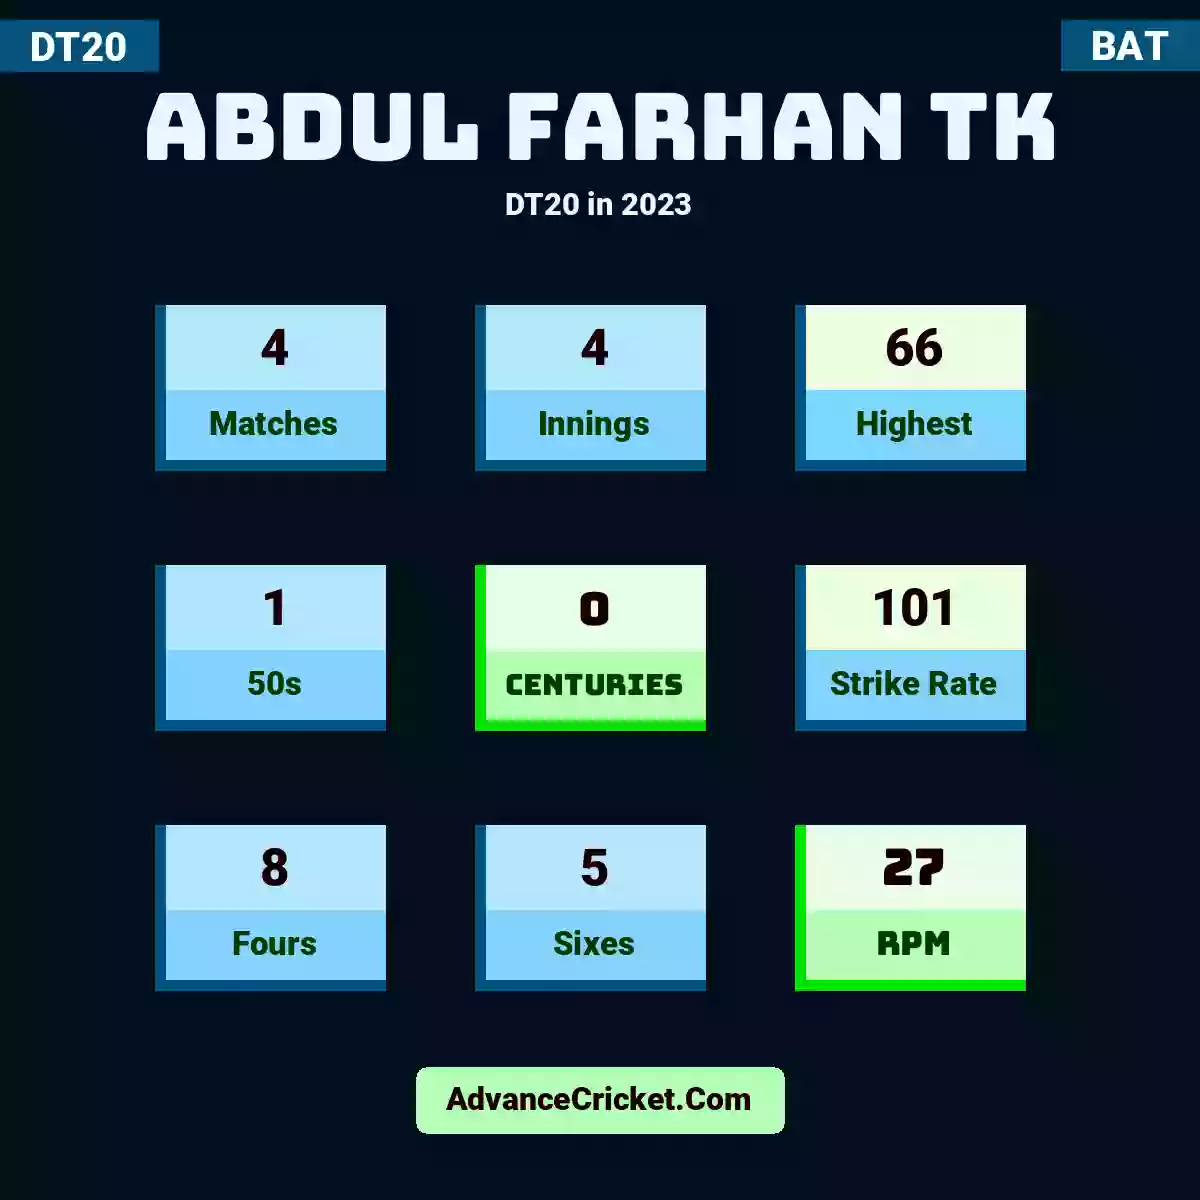 Abdul Farhan TK DT20  in 2023, Abdul Farhan TK played 4 matches, scored 66 runs as highest, 1 half-centuries, and 0 centuries, with a strike rate of 101. A.Farhan.TK hit 8 fours and 5 sixes, with an RPM of 27.